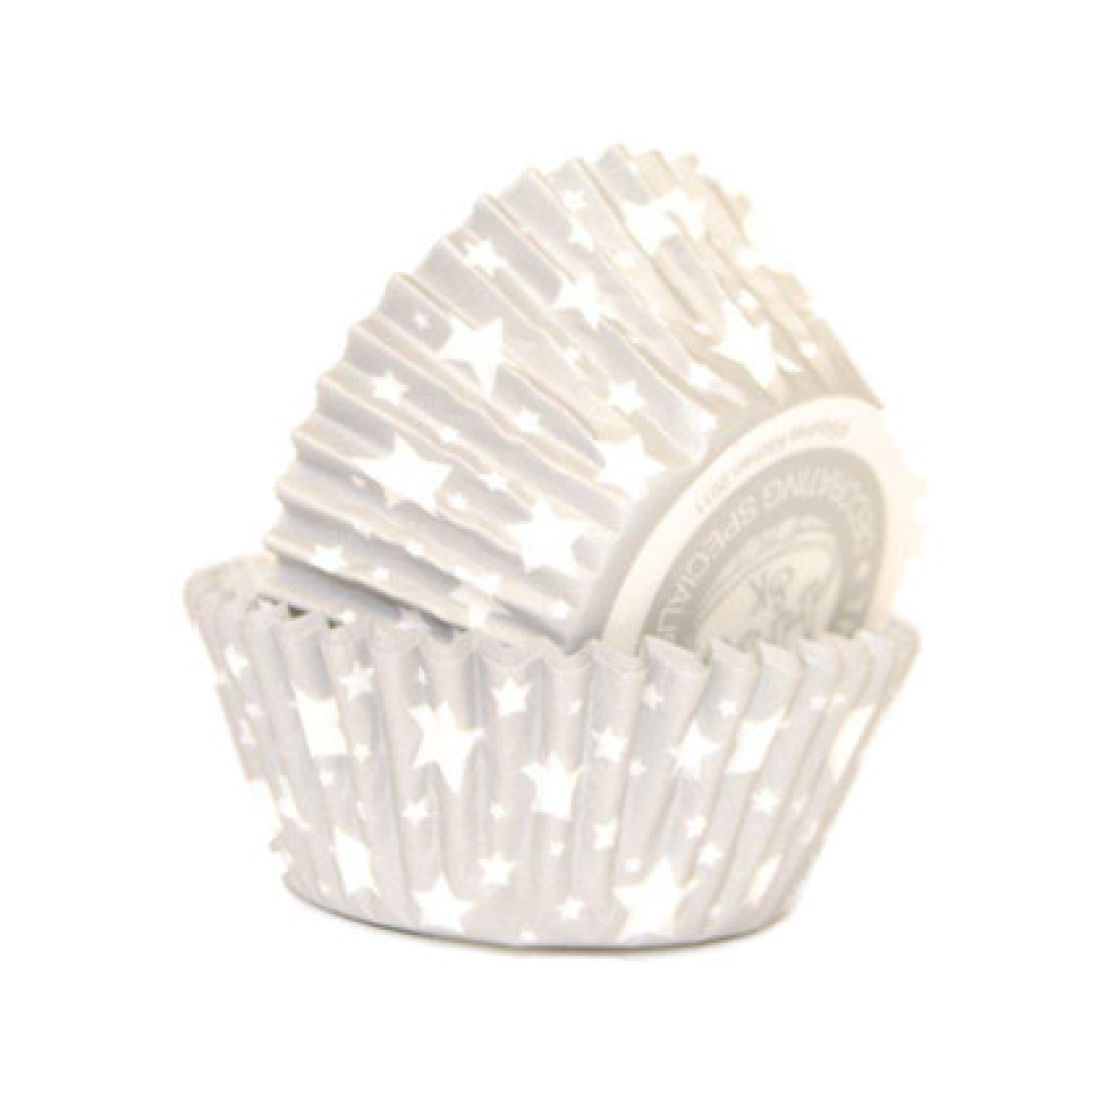 Pack of 36 Silver High Quality Muffin Cupcake Cases 